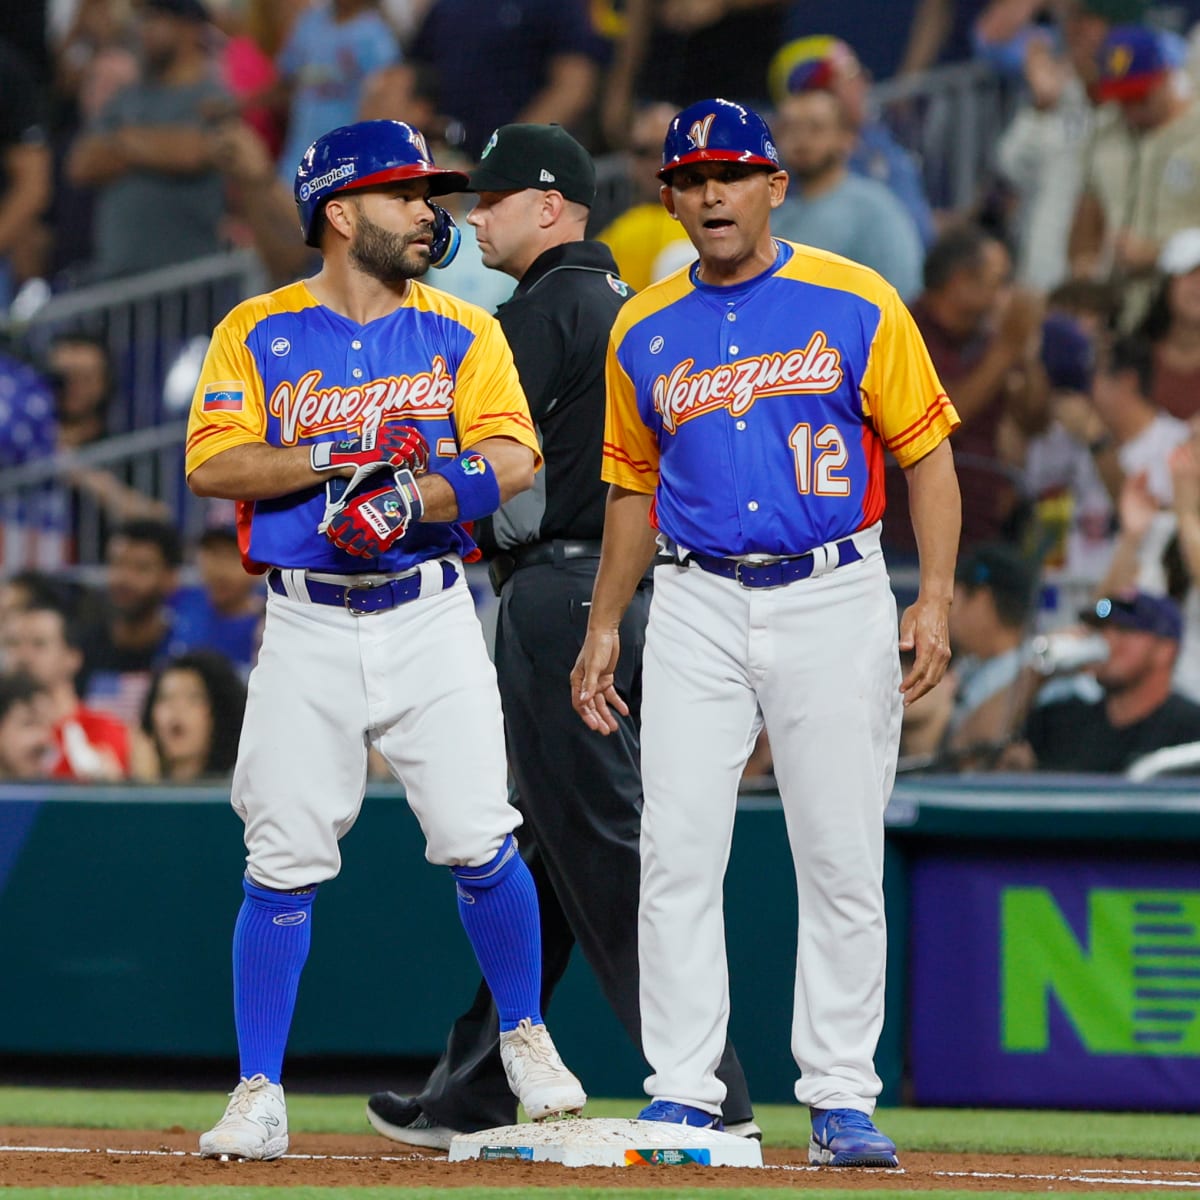 Report: Houston Astros Second Baseman José Altuve Will Play for Team  Venezuela in World Baseball Classic - Sports Illustrated Inside The Astros